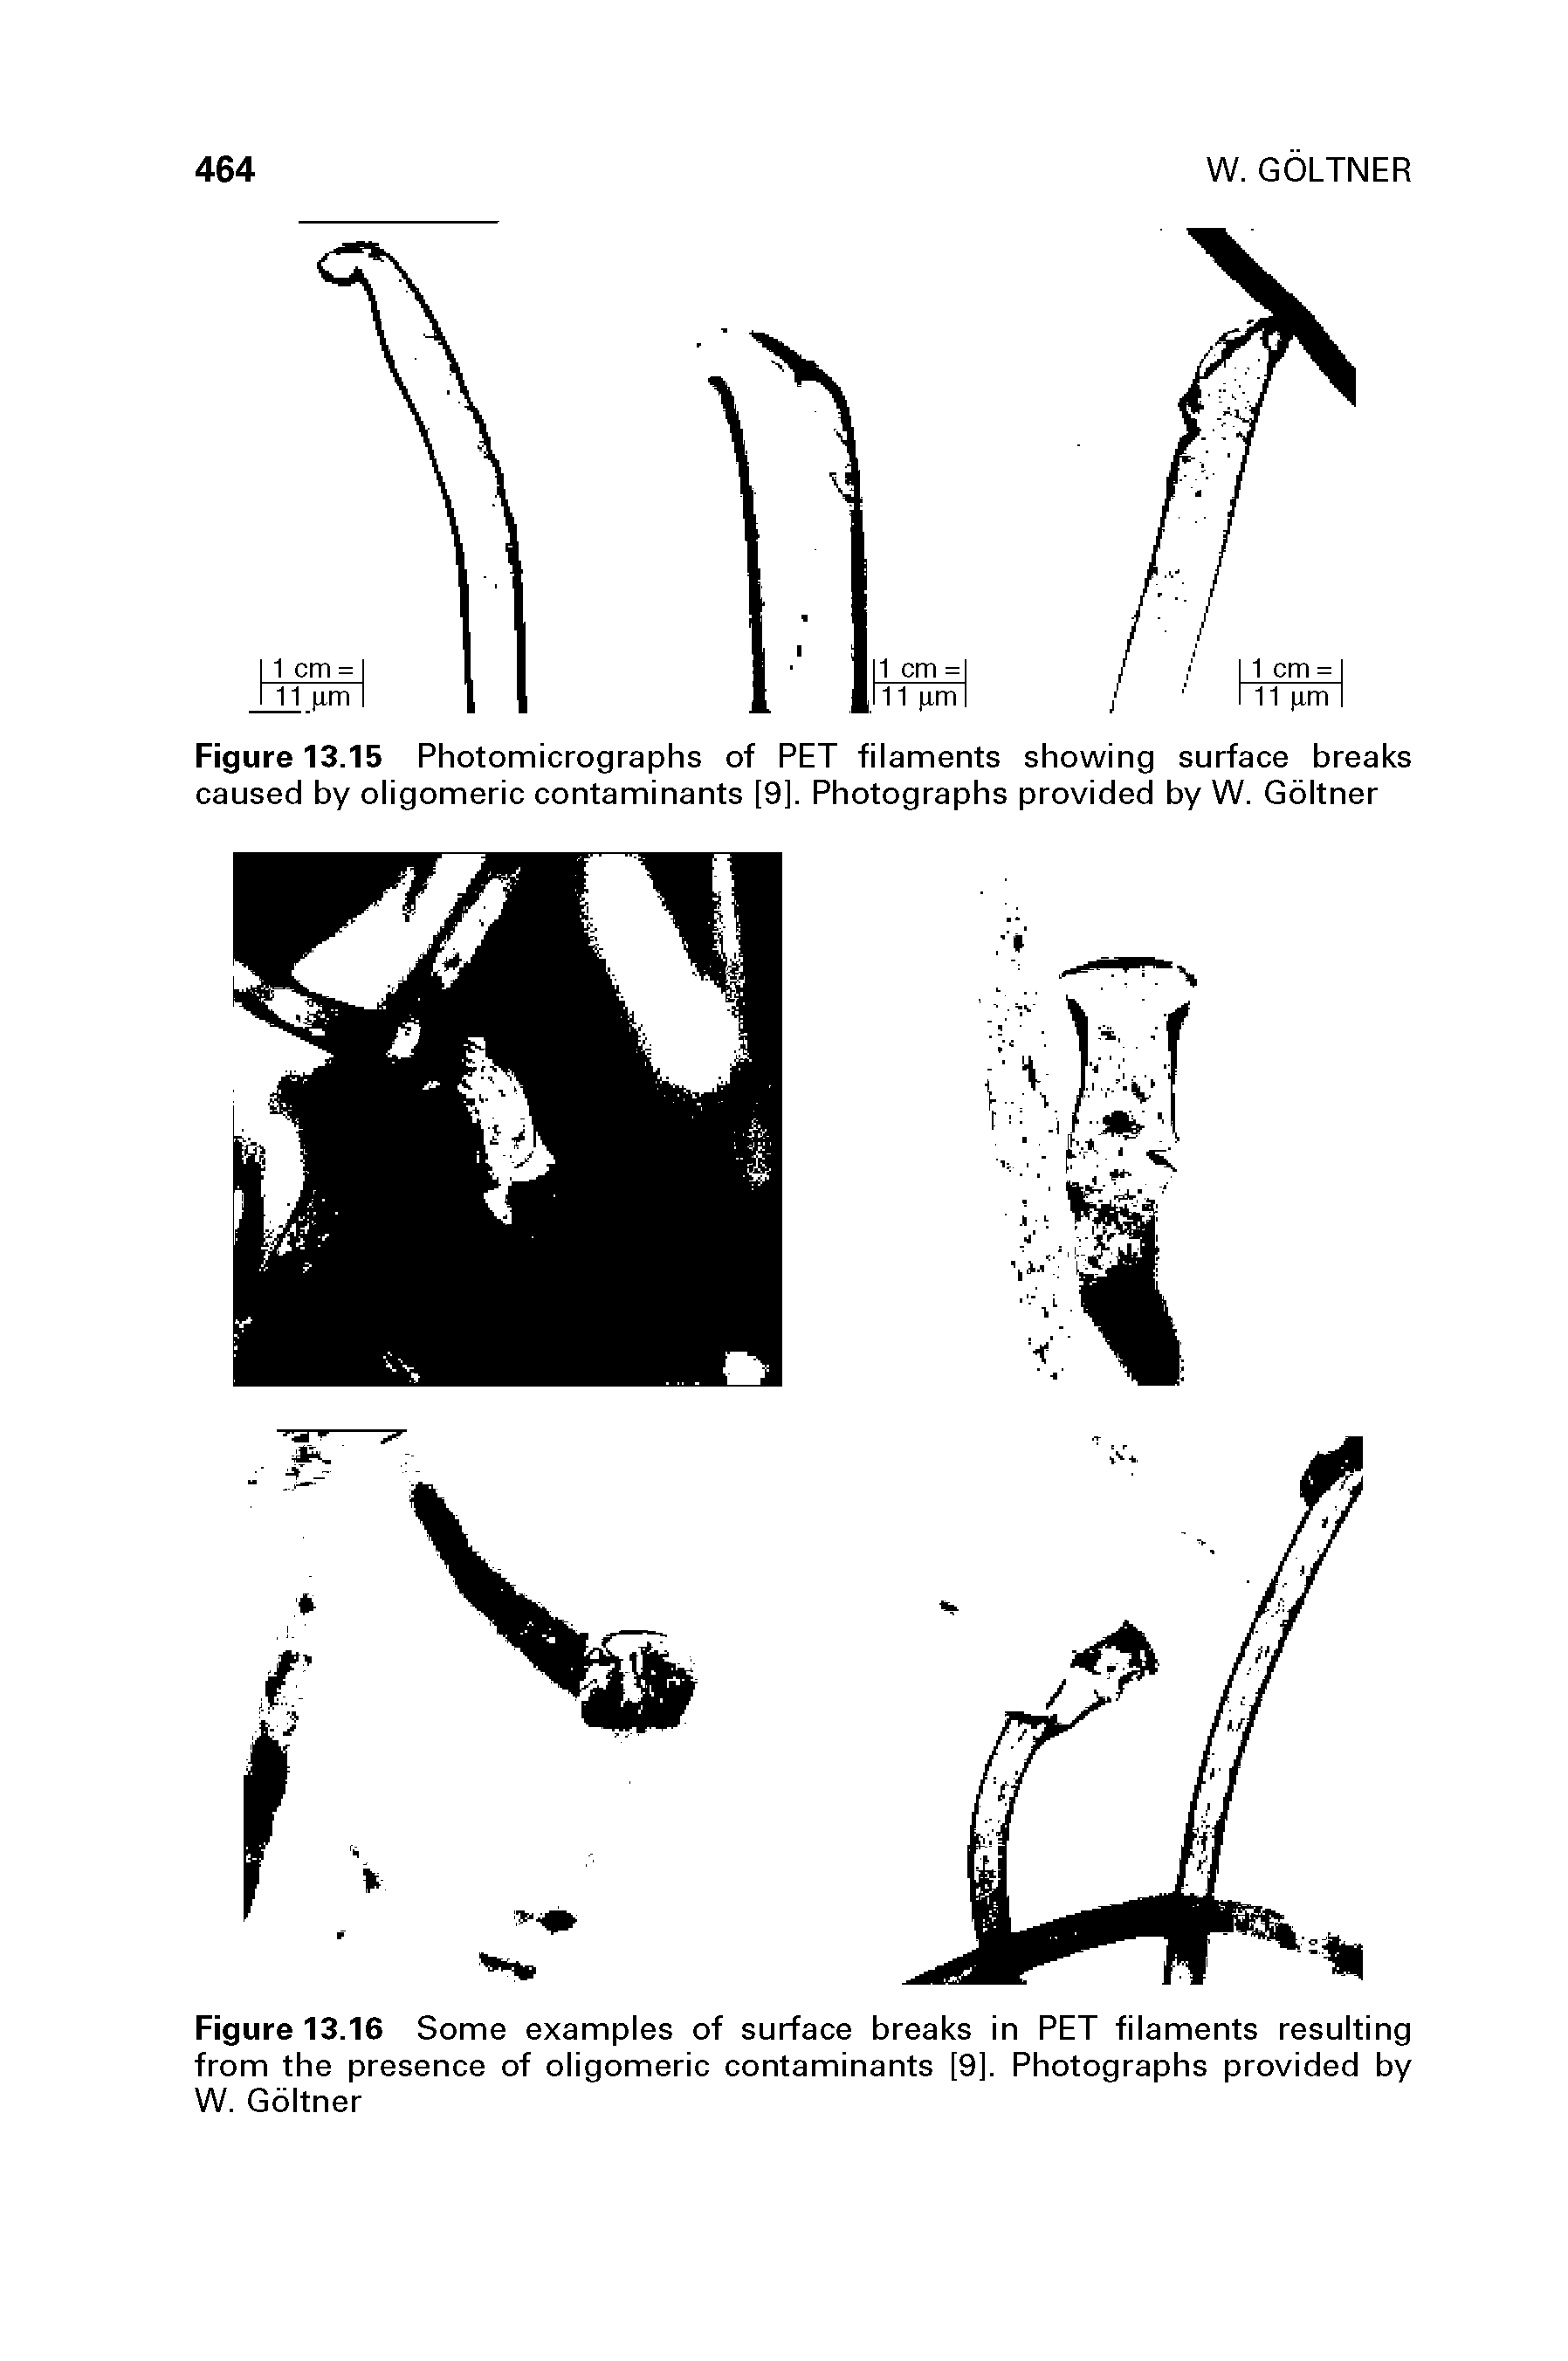 Figure 13.15 Photomicrographs of PET filaments showing surface breaks caused by oligomeric contaminants [9]. Photographs provided by W. Goltner...